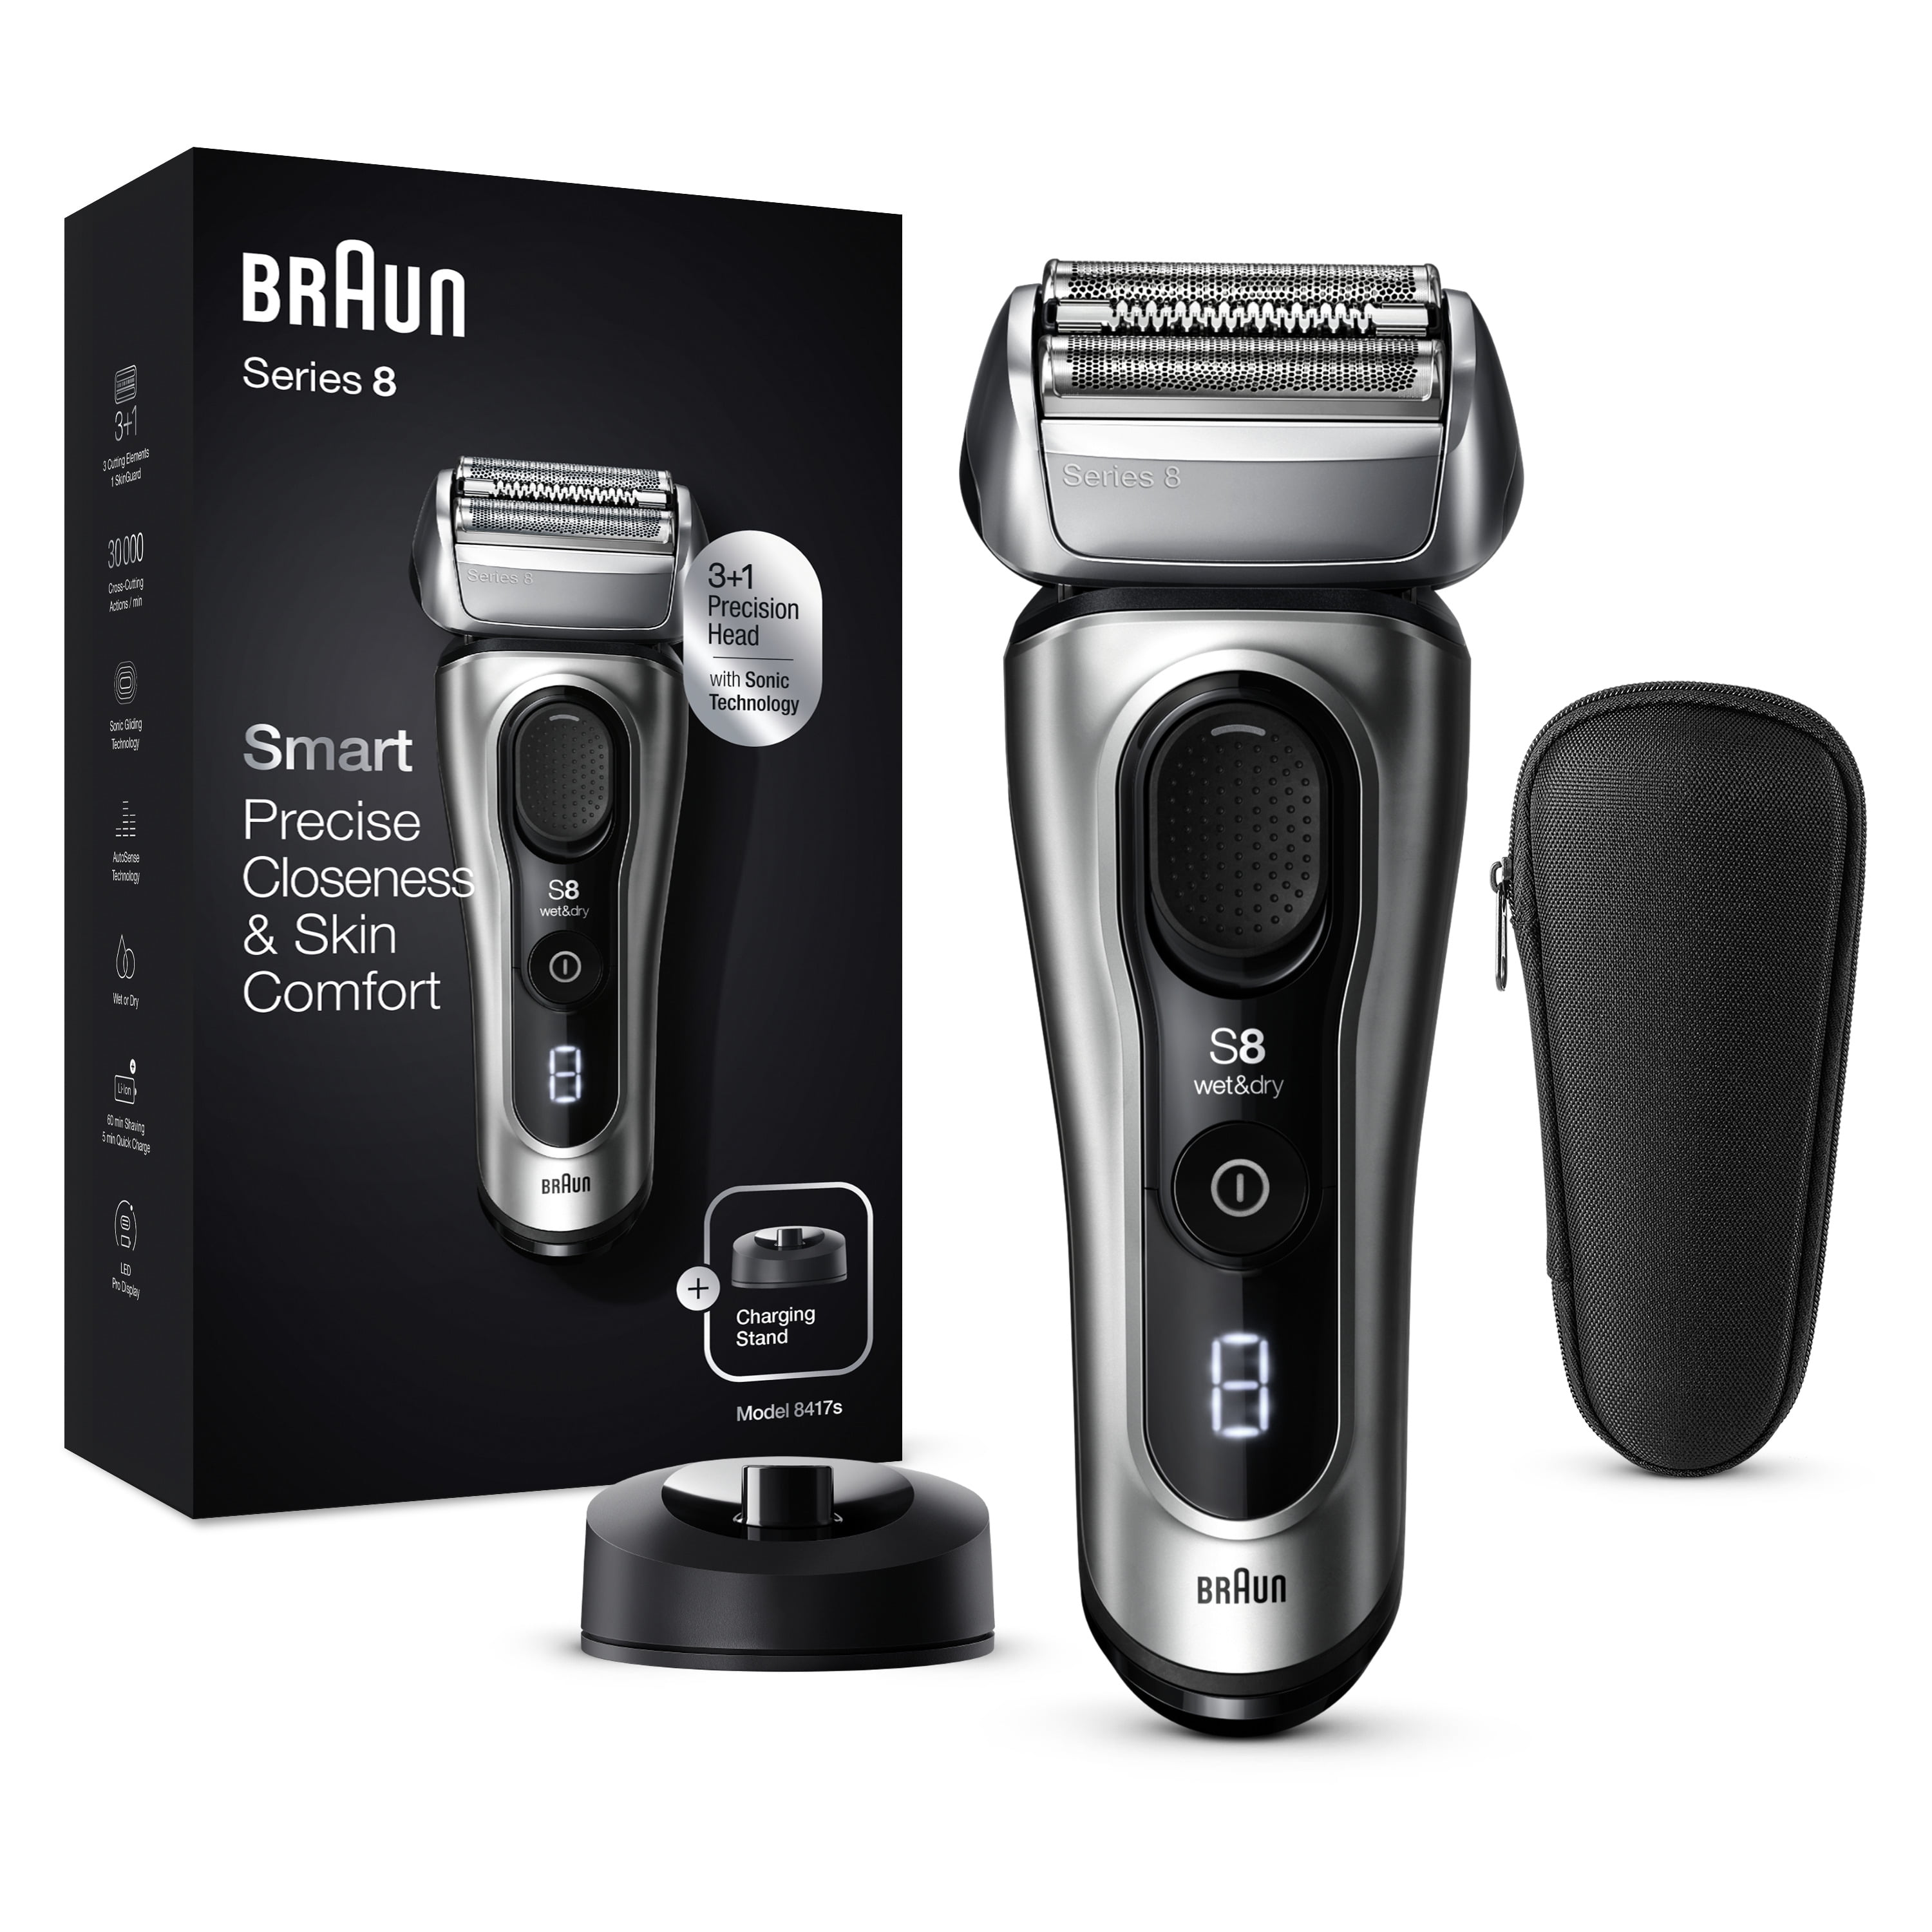 Braun Series 8 8417s Electric Shaver for Men with Precision Beard Trimmer, Silver